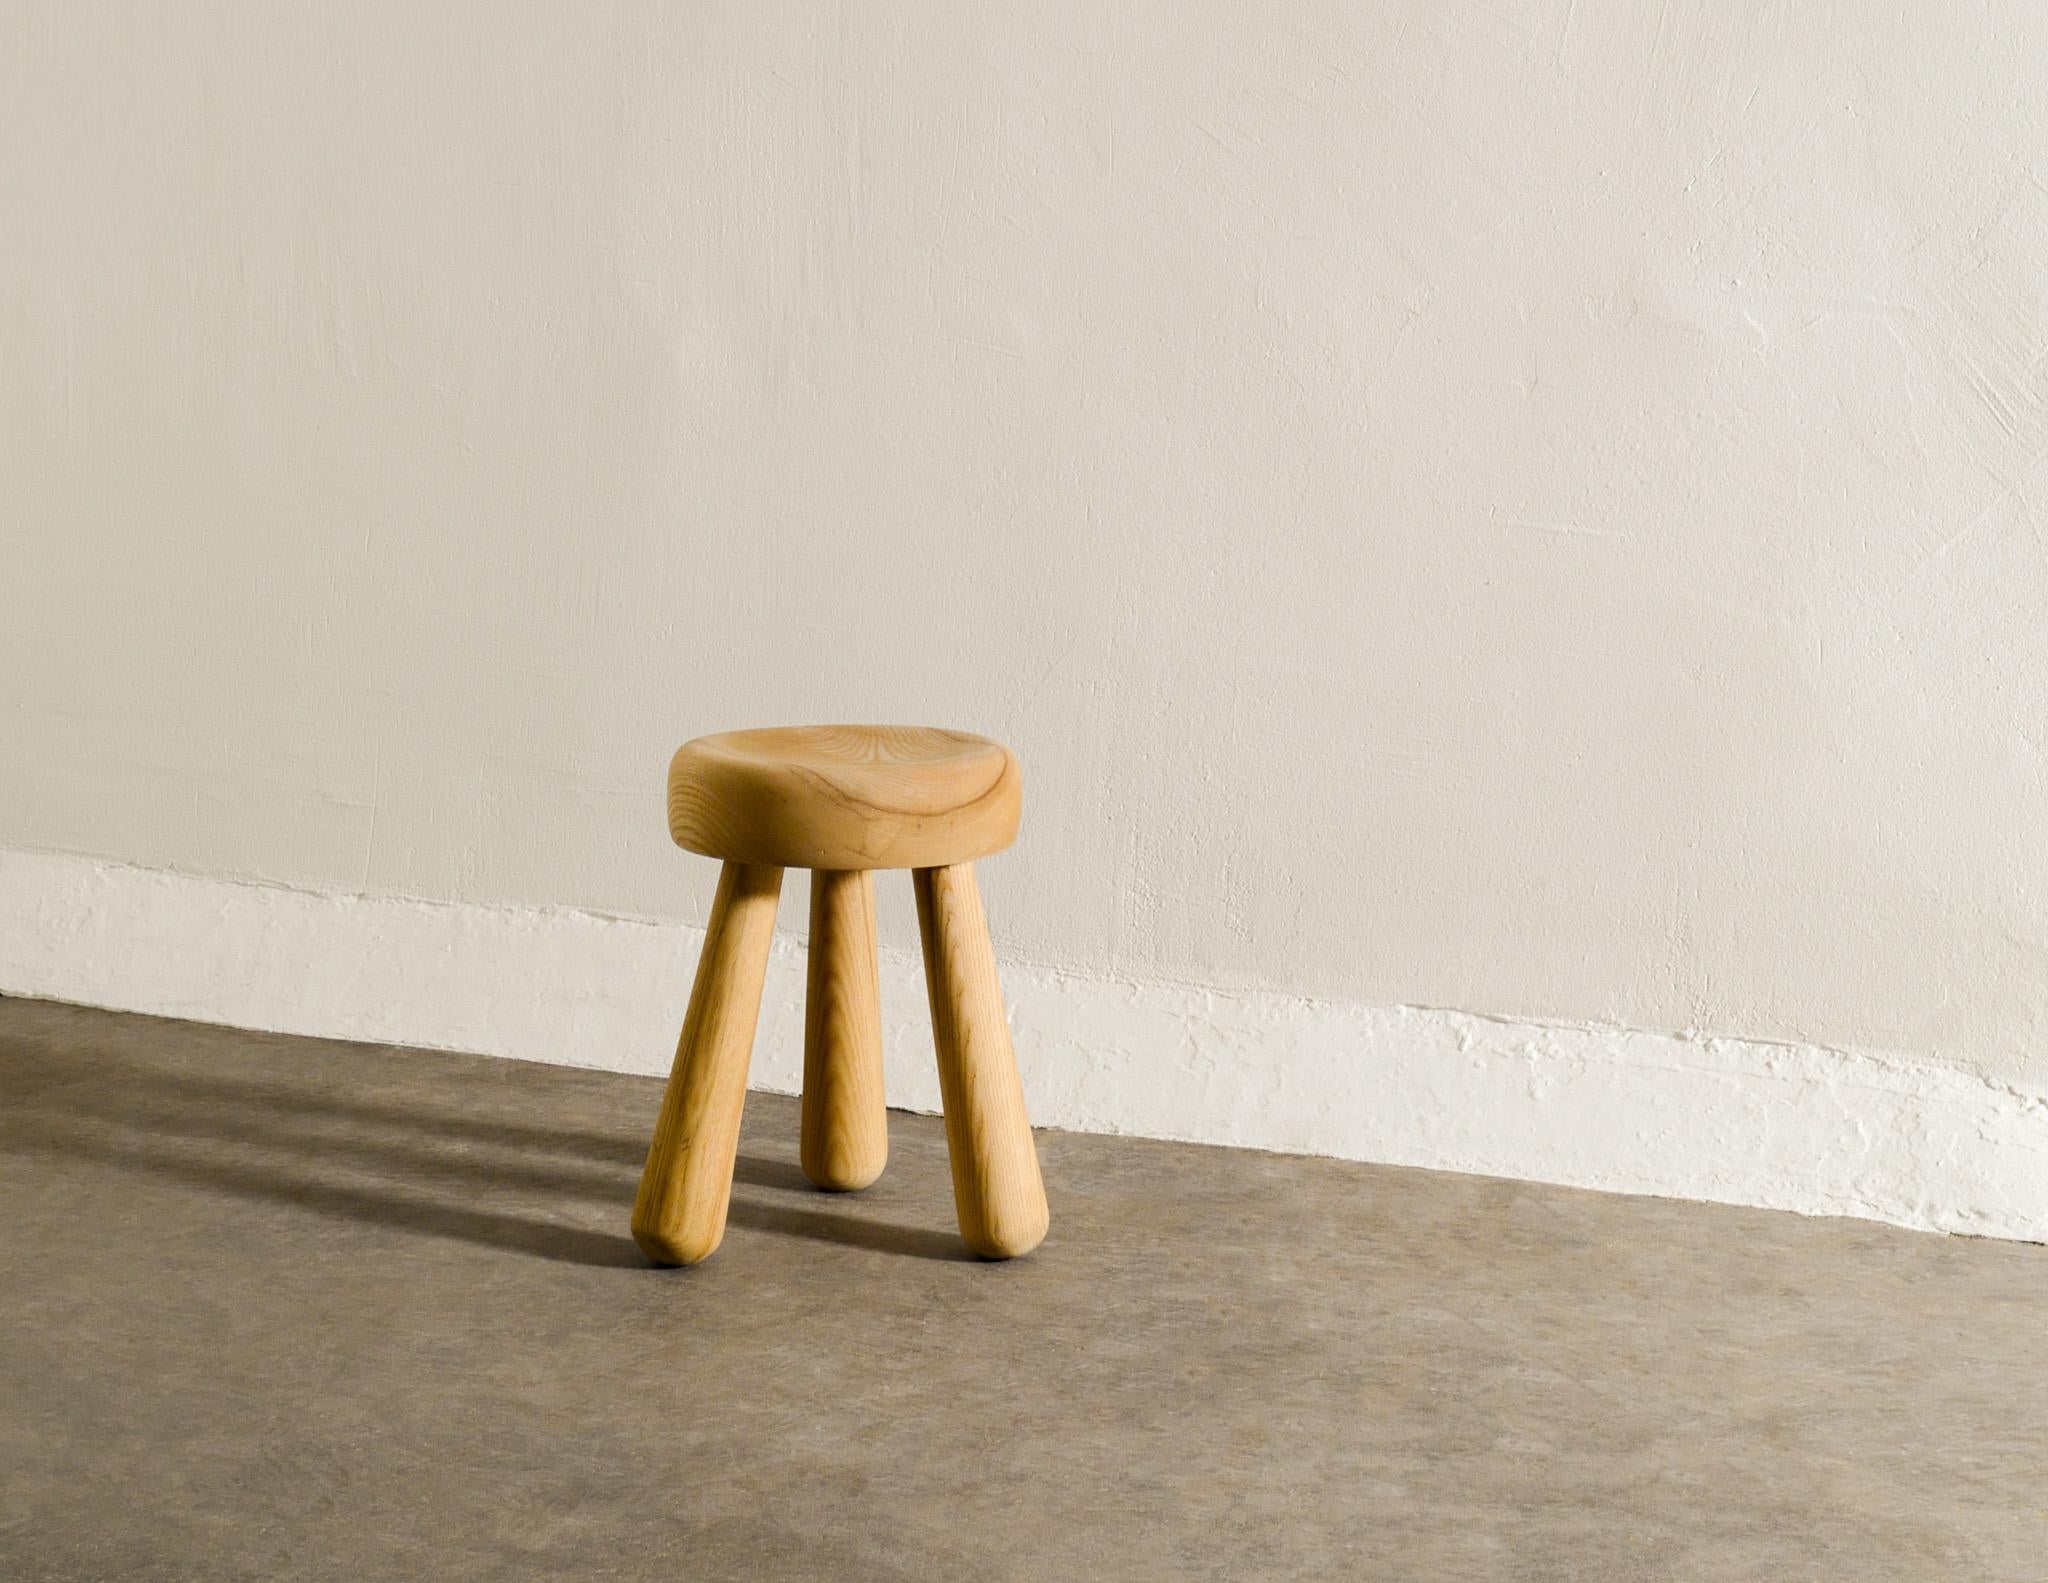 Scandinavian Modern Wooden Low Mid Century Stool in Ash by Ingvar Hildingsson, 1970s For Sale